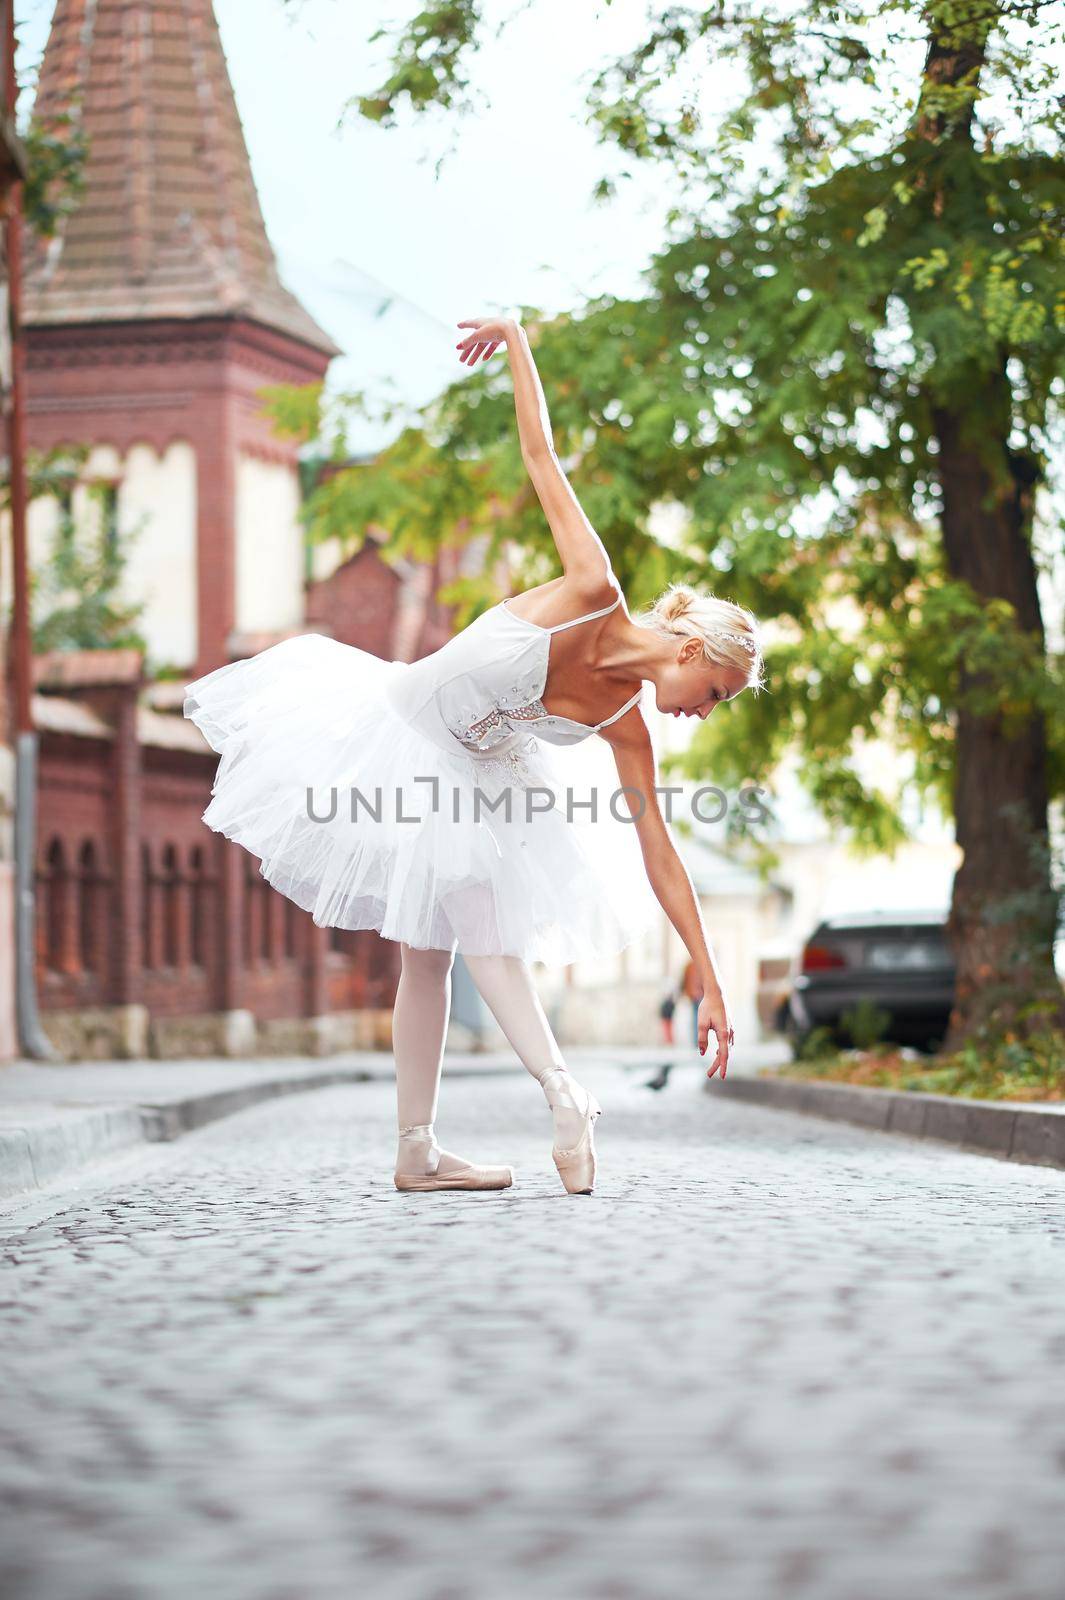 Shot of a beautiful ballerina dancing sensually on the street of an old beautiful town performance art grace elegance femininity concept.